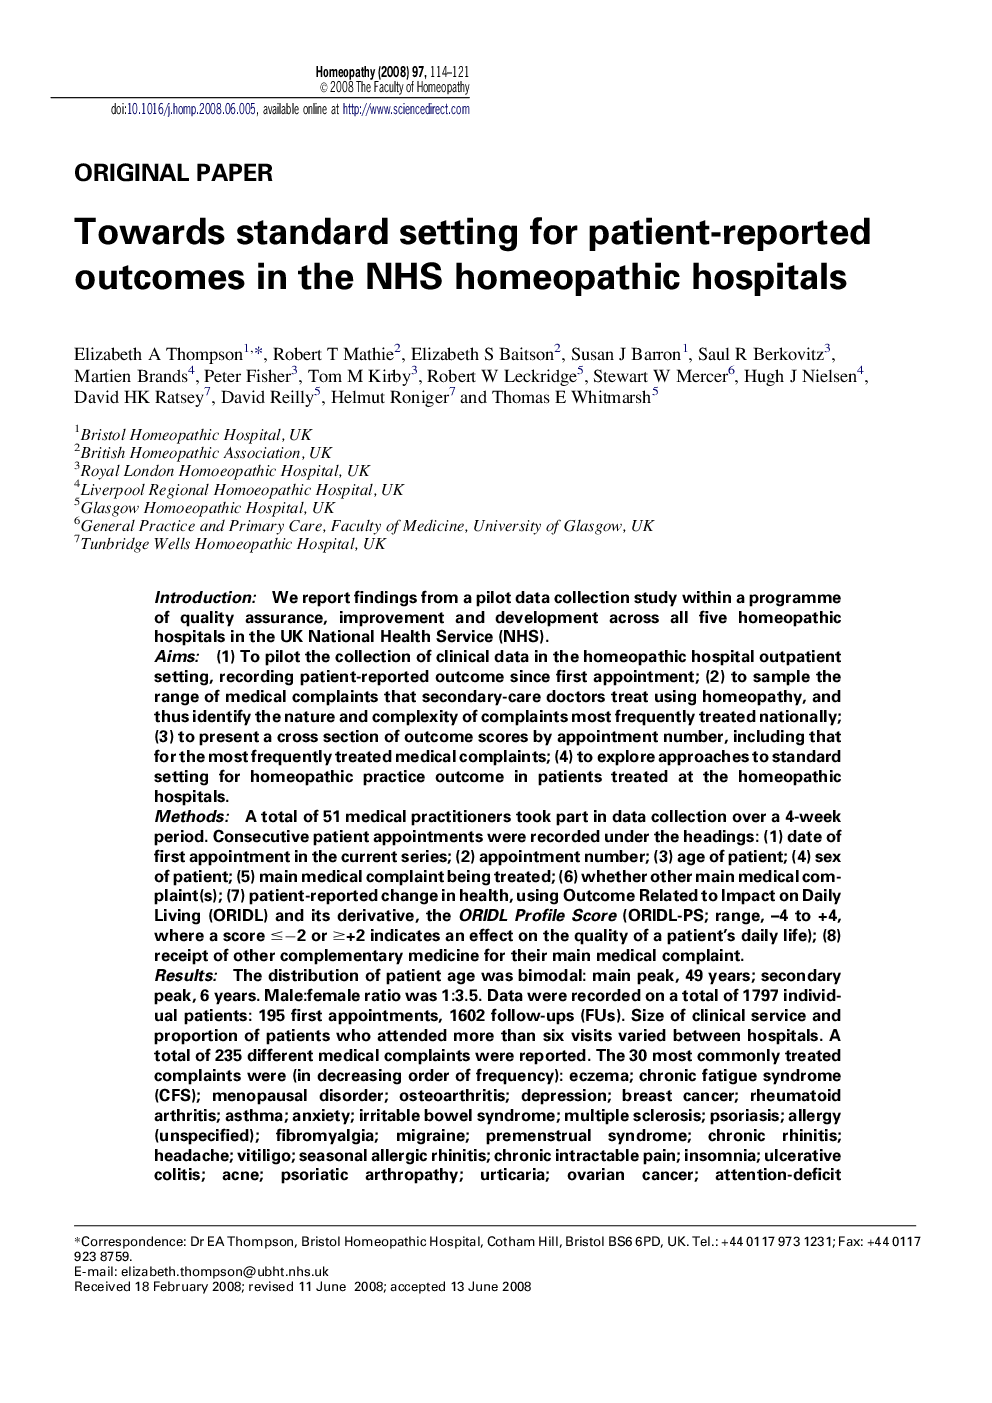 Towards standard setting for patient-reported outcomes in the NHS homeopathic hospitals